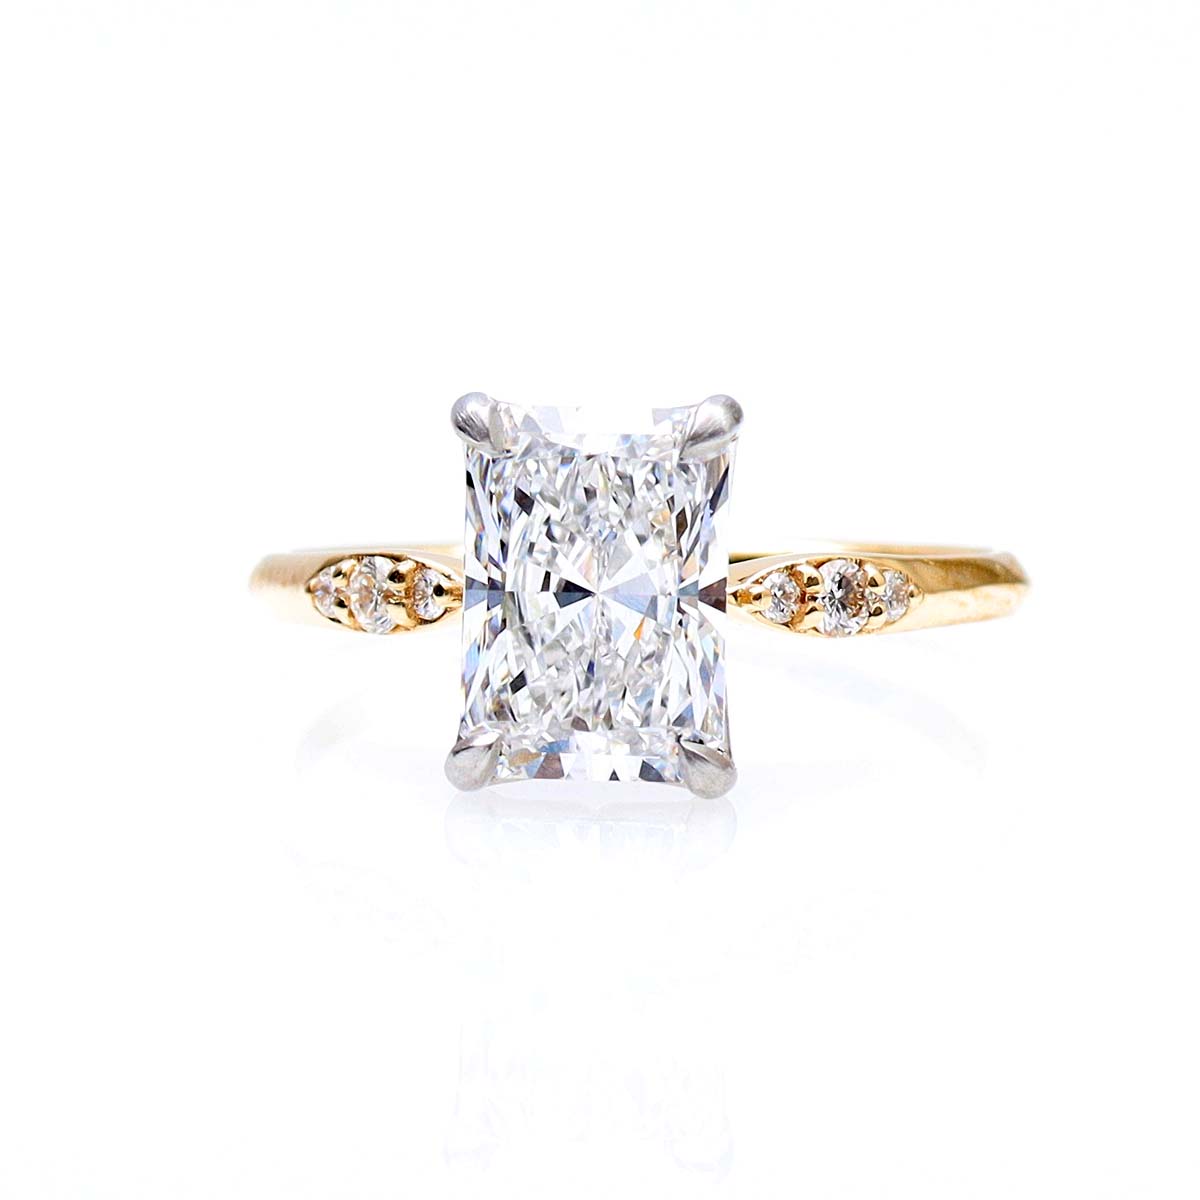 The Adrienne Edwardian Revival Engagement Ring #3616-2